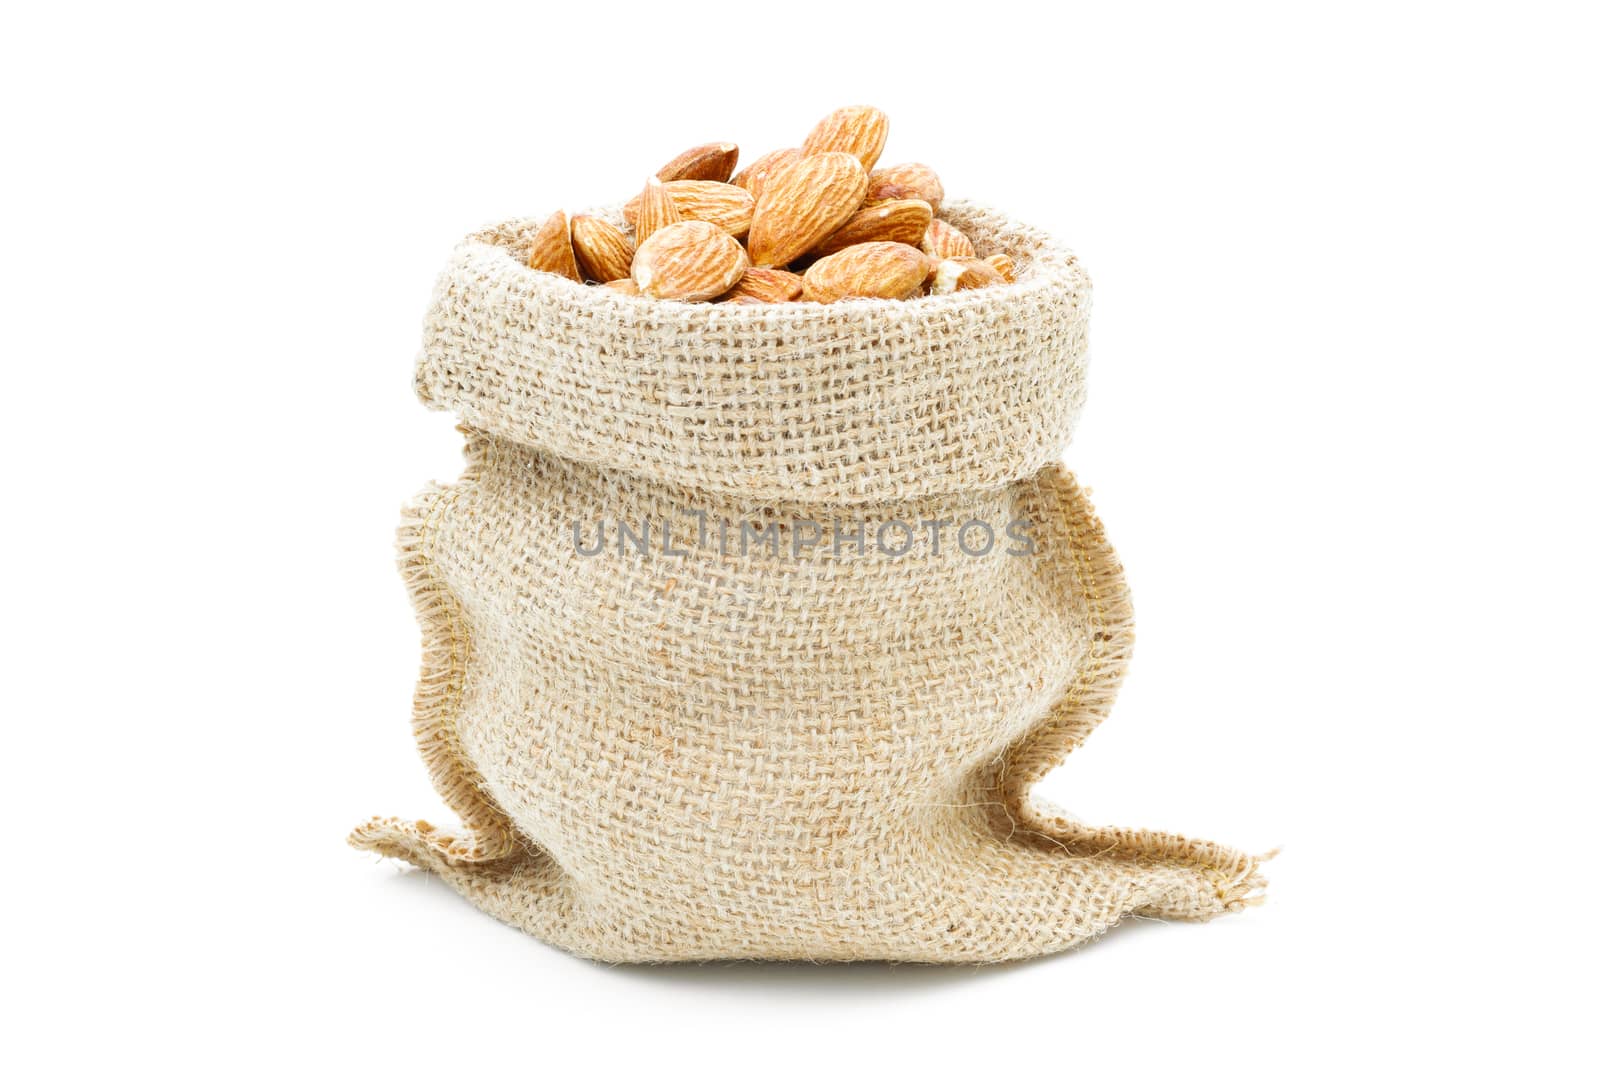 Almonds in a sack of cloth on a white background